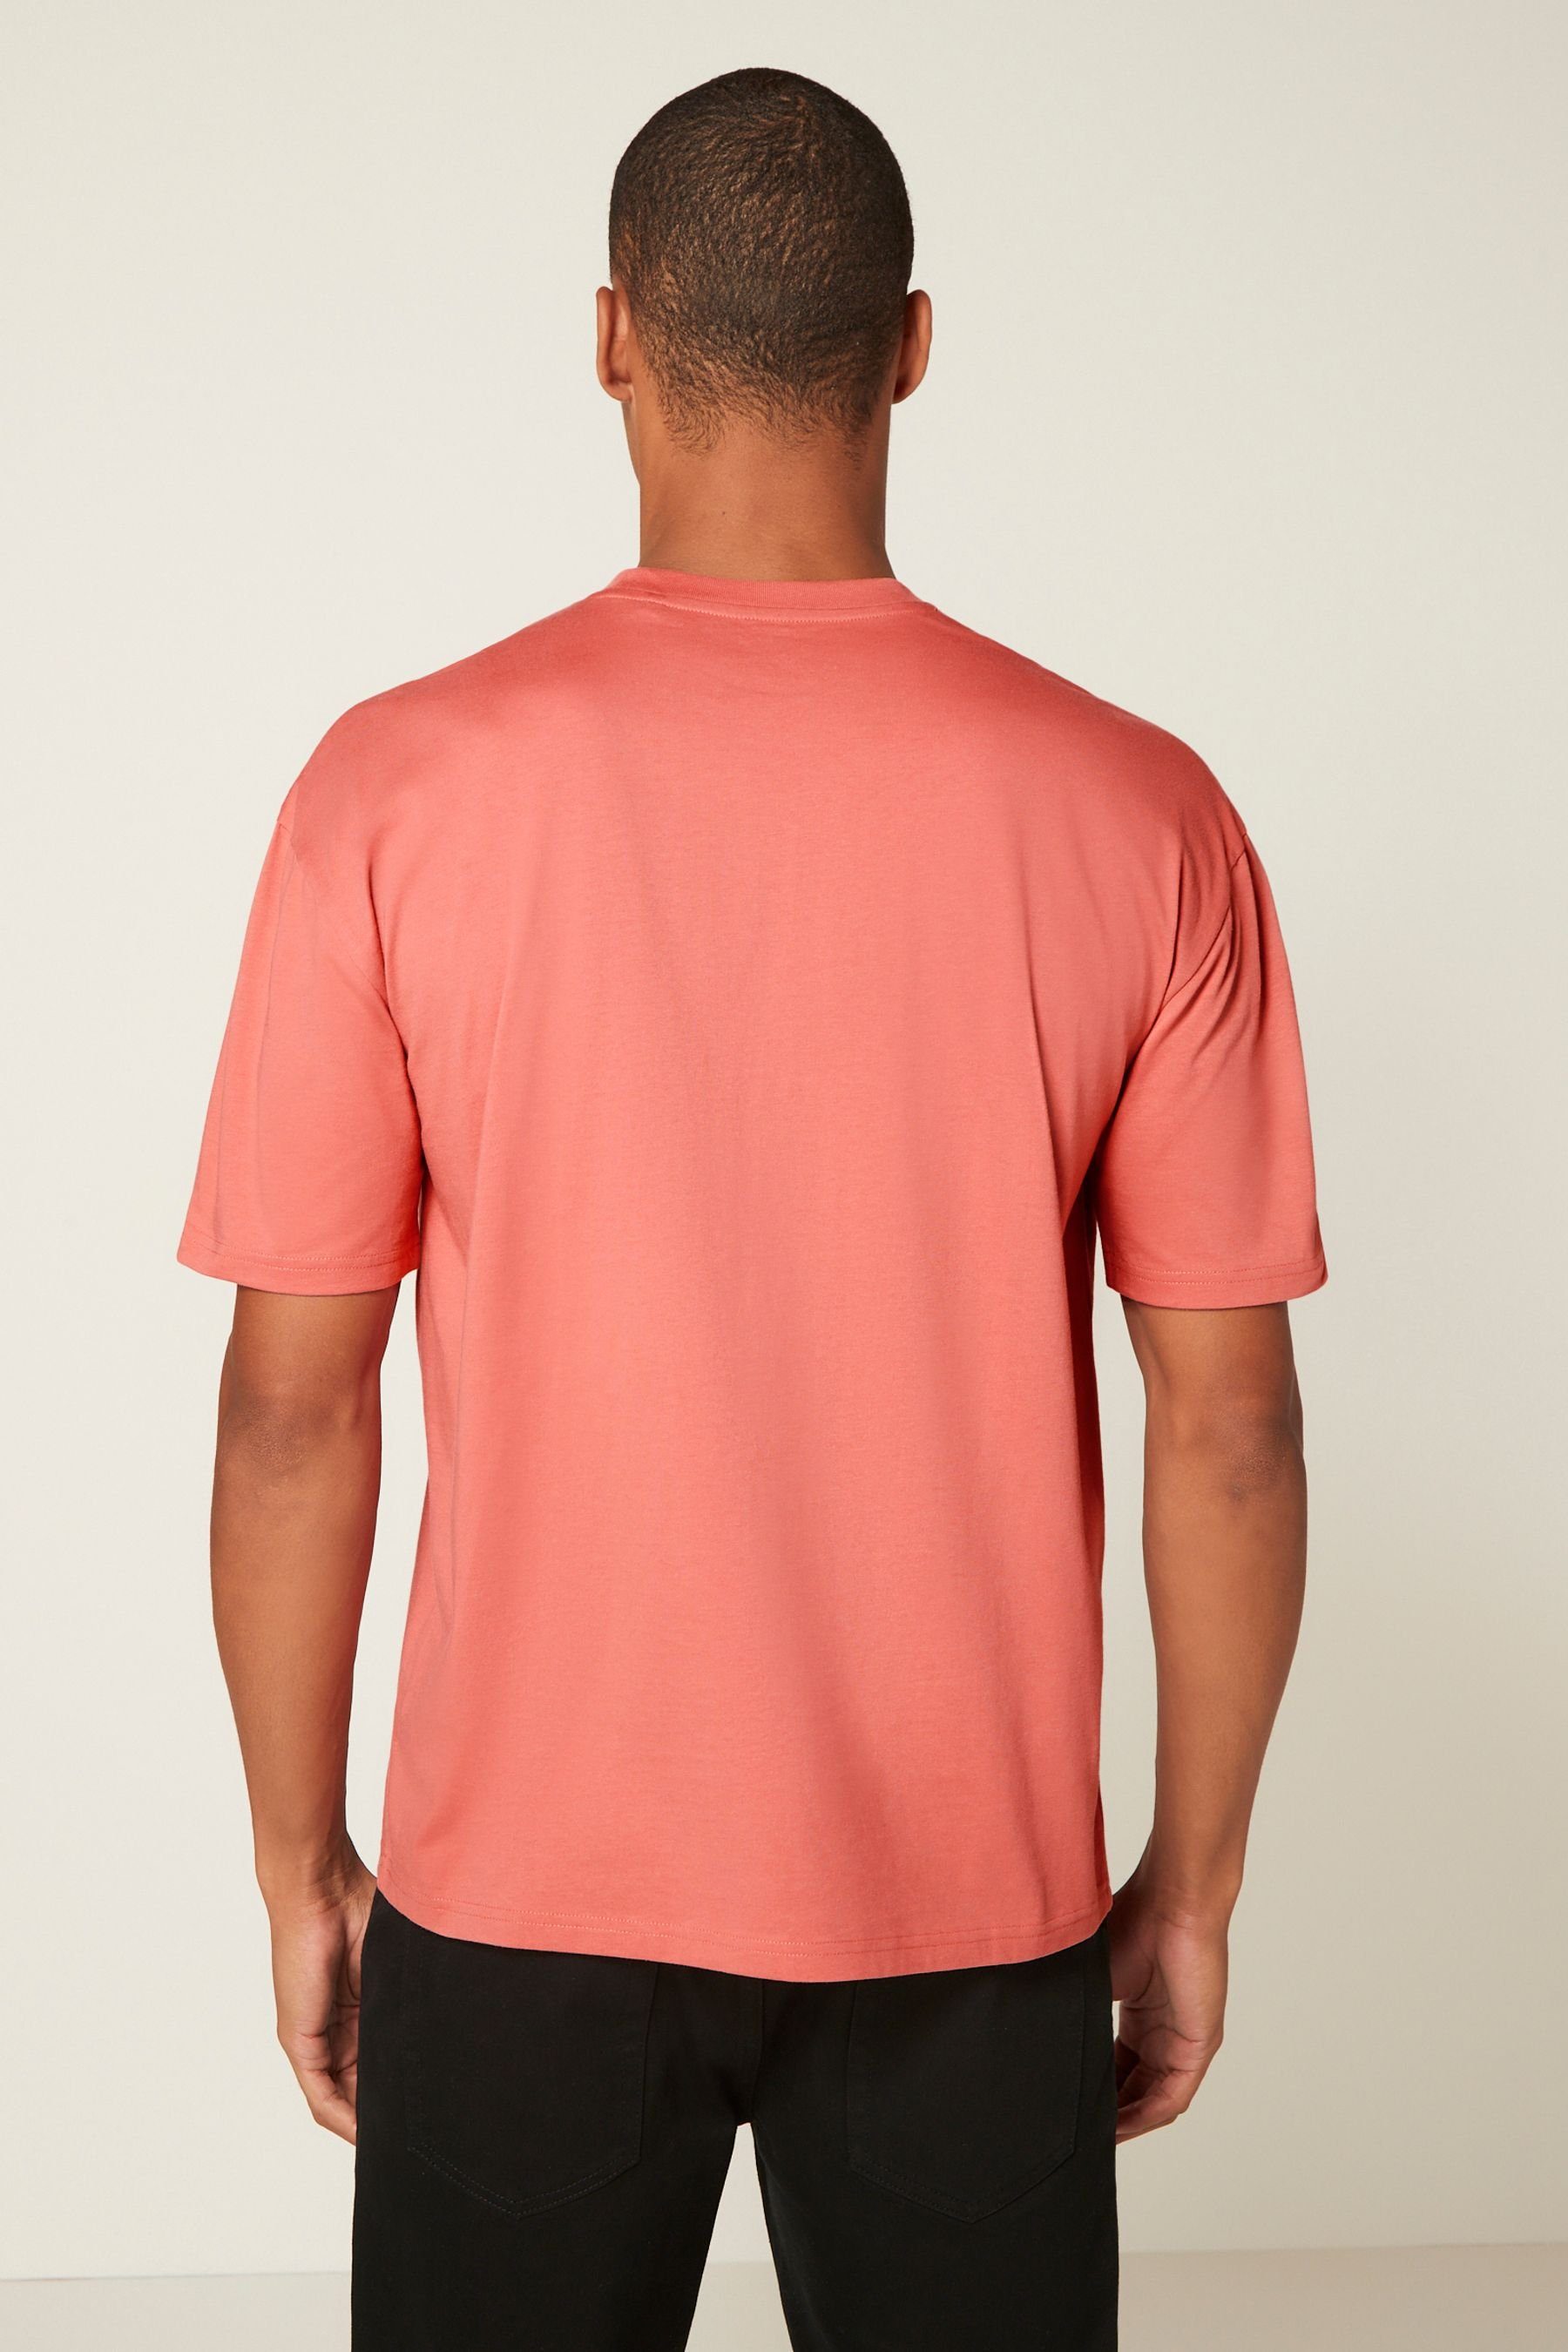 Relaxed Next Pink Rundhals-T-Shirt (1-tlg) im Fit Coral T-Shirt